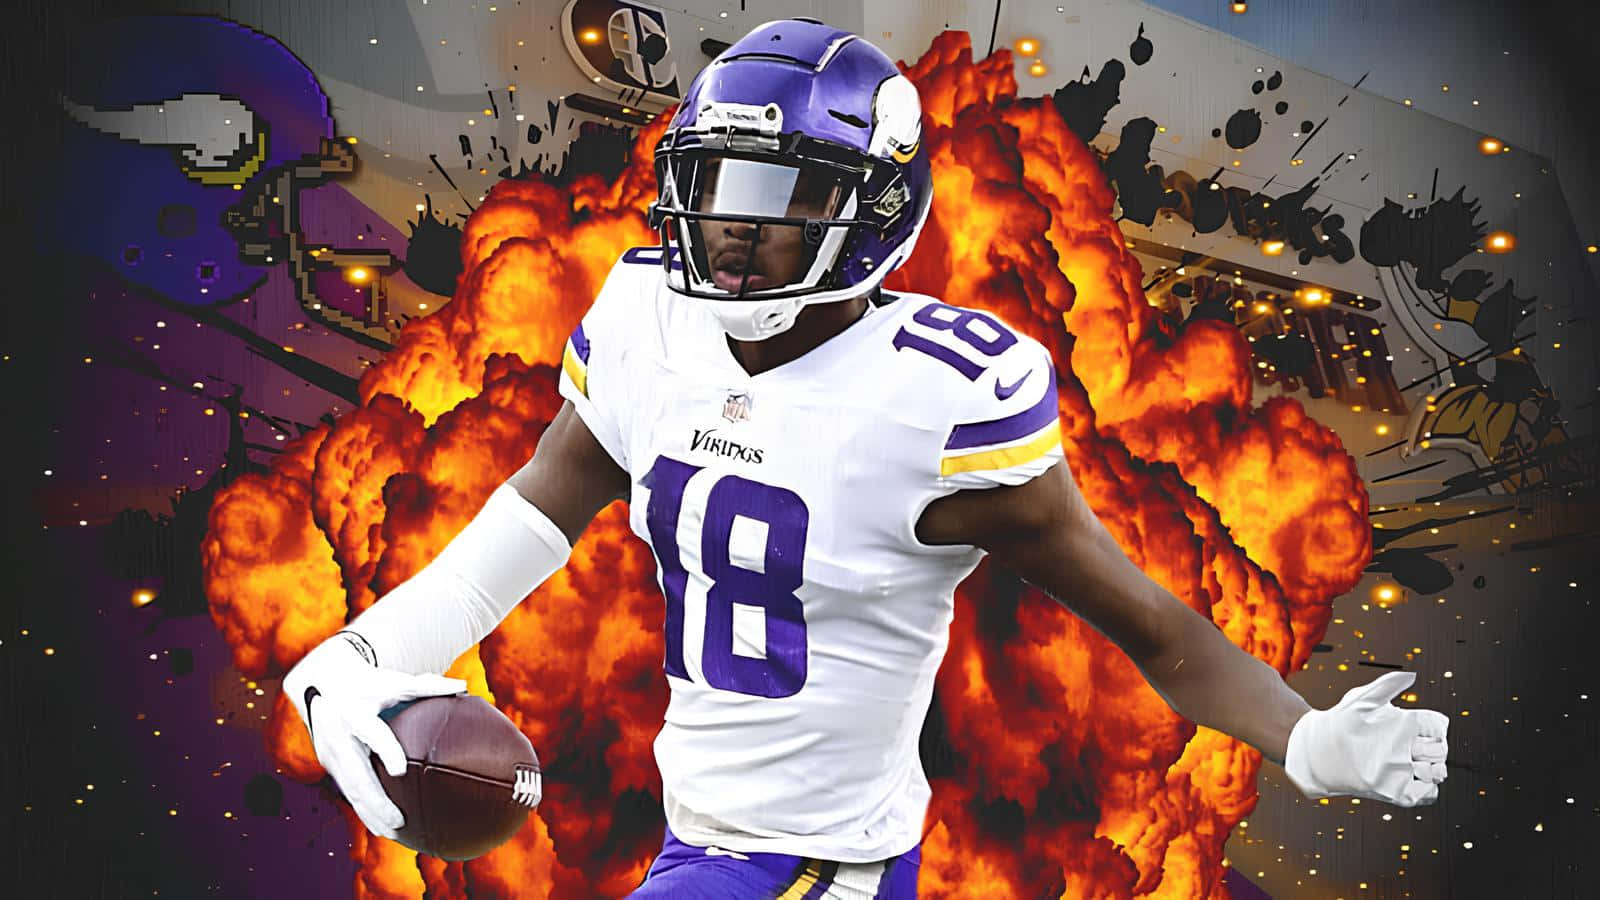 Explosive Football Player Dynamic Background Wallpaper